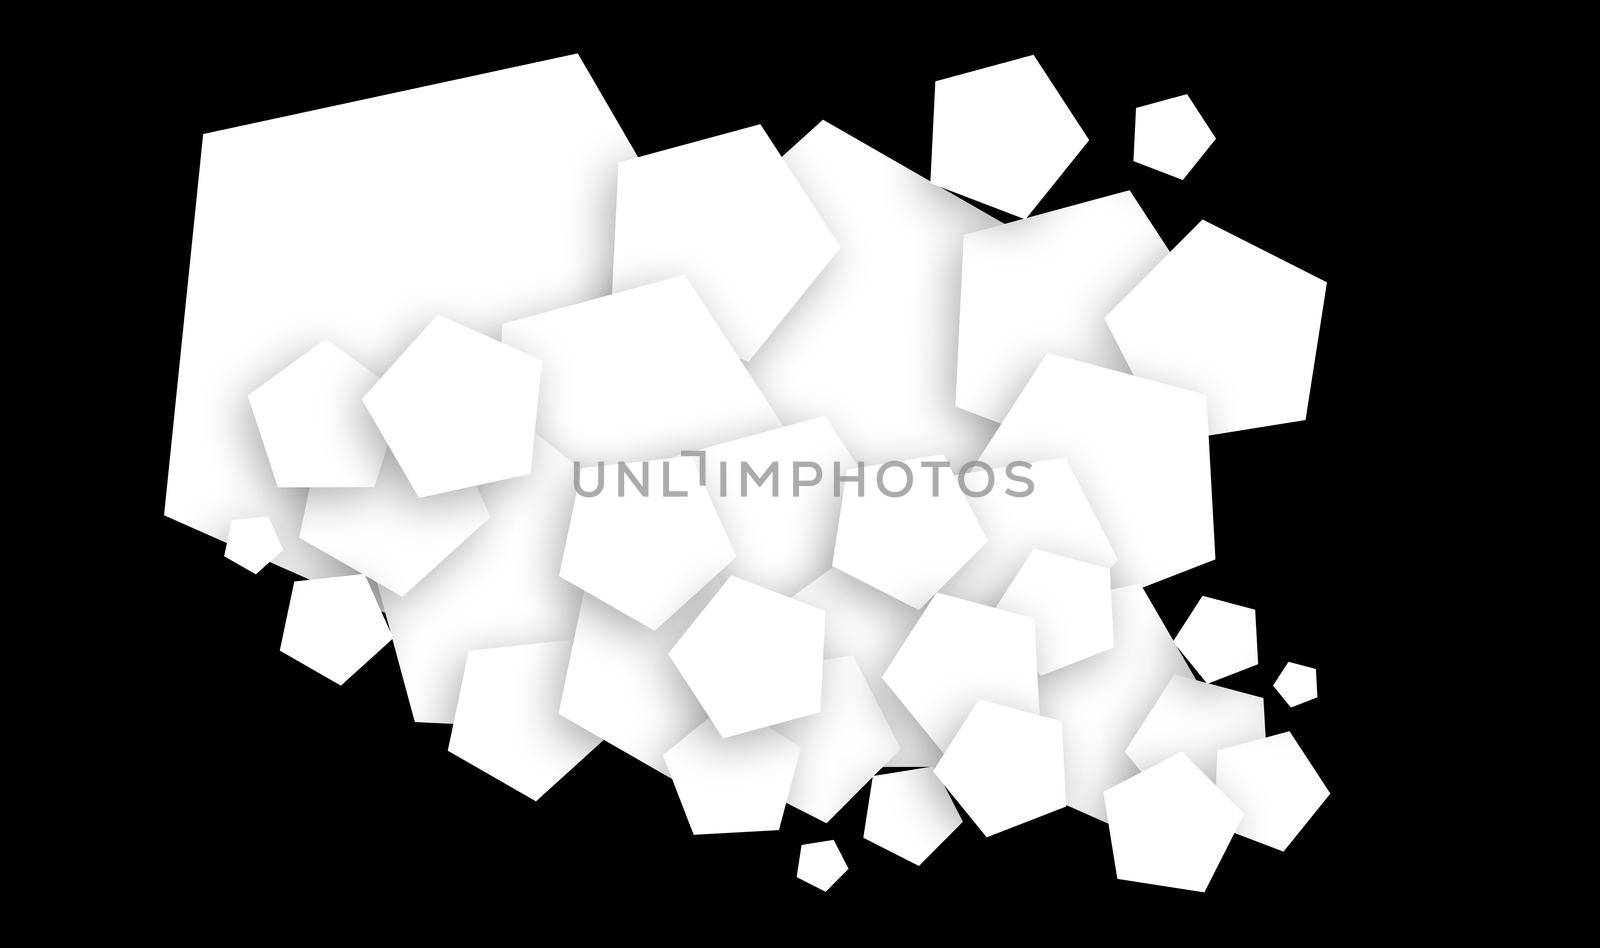 abstract concept design made of pentagon creating a design by overlapping on each other in the black isolated background with soft shadow, layered image ready to print for cards, invitation, design print